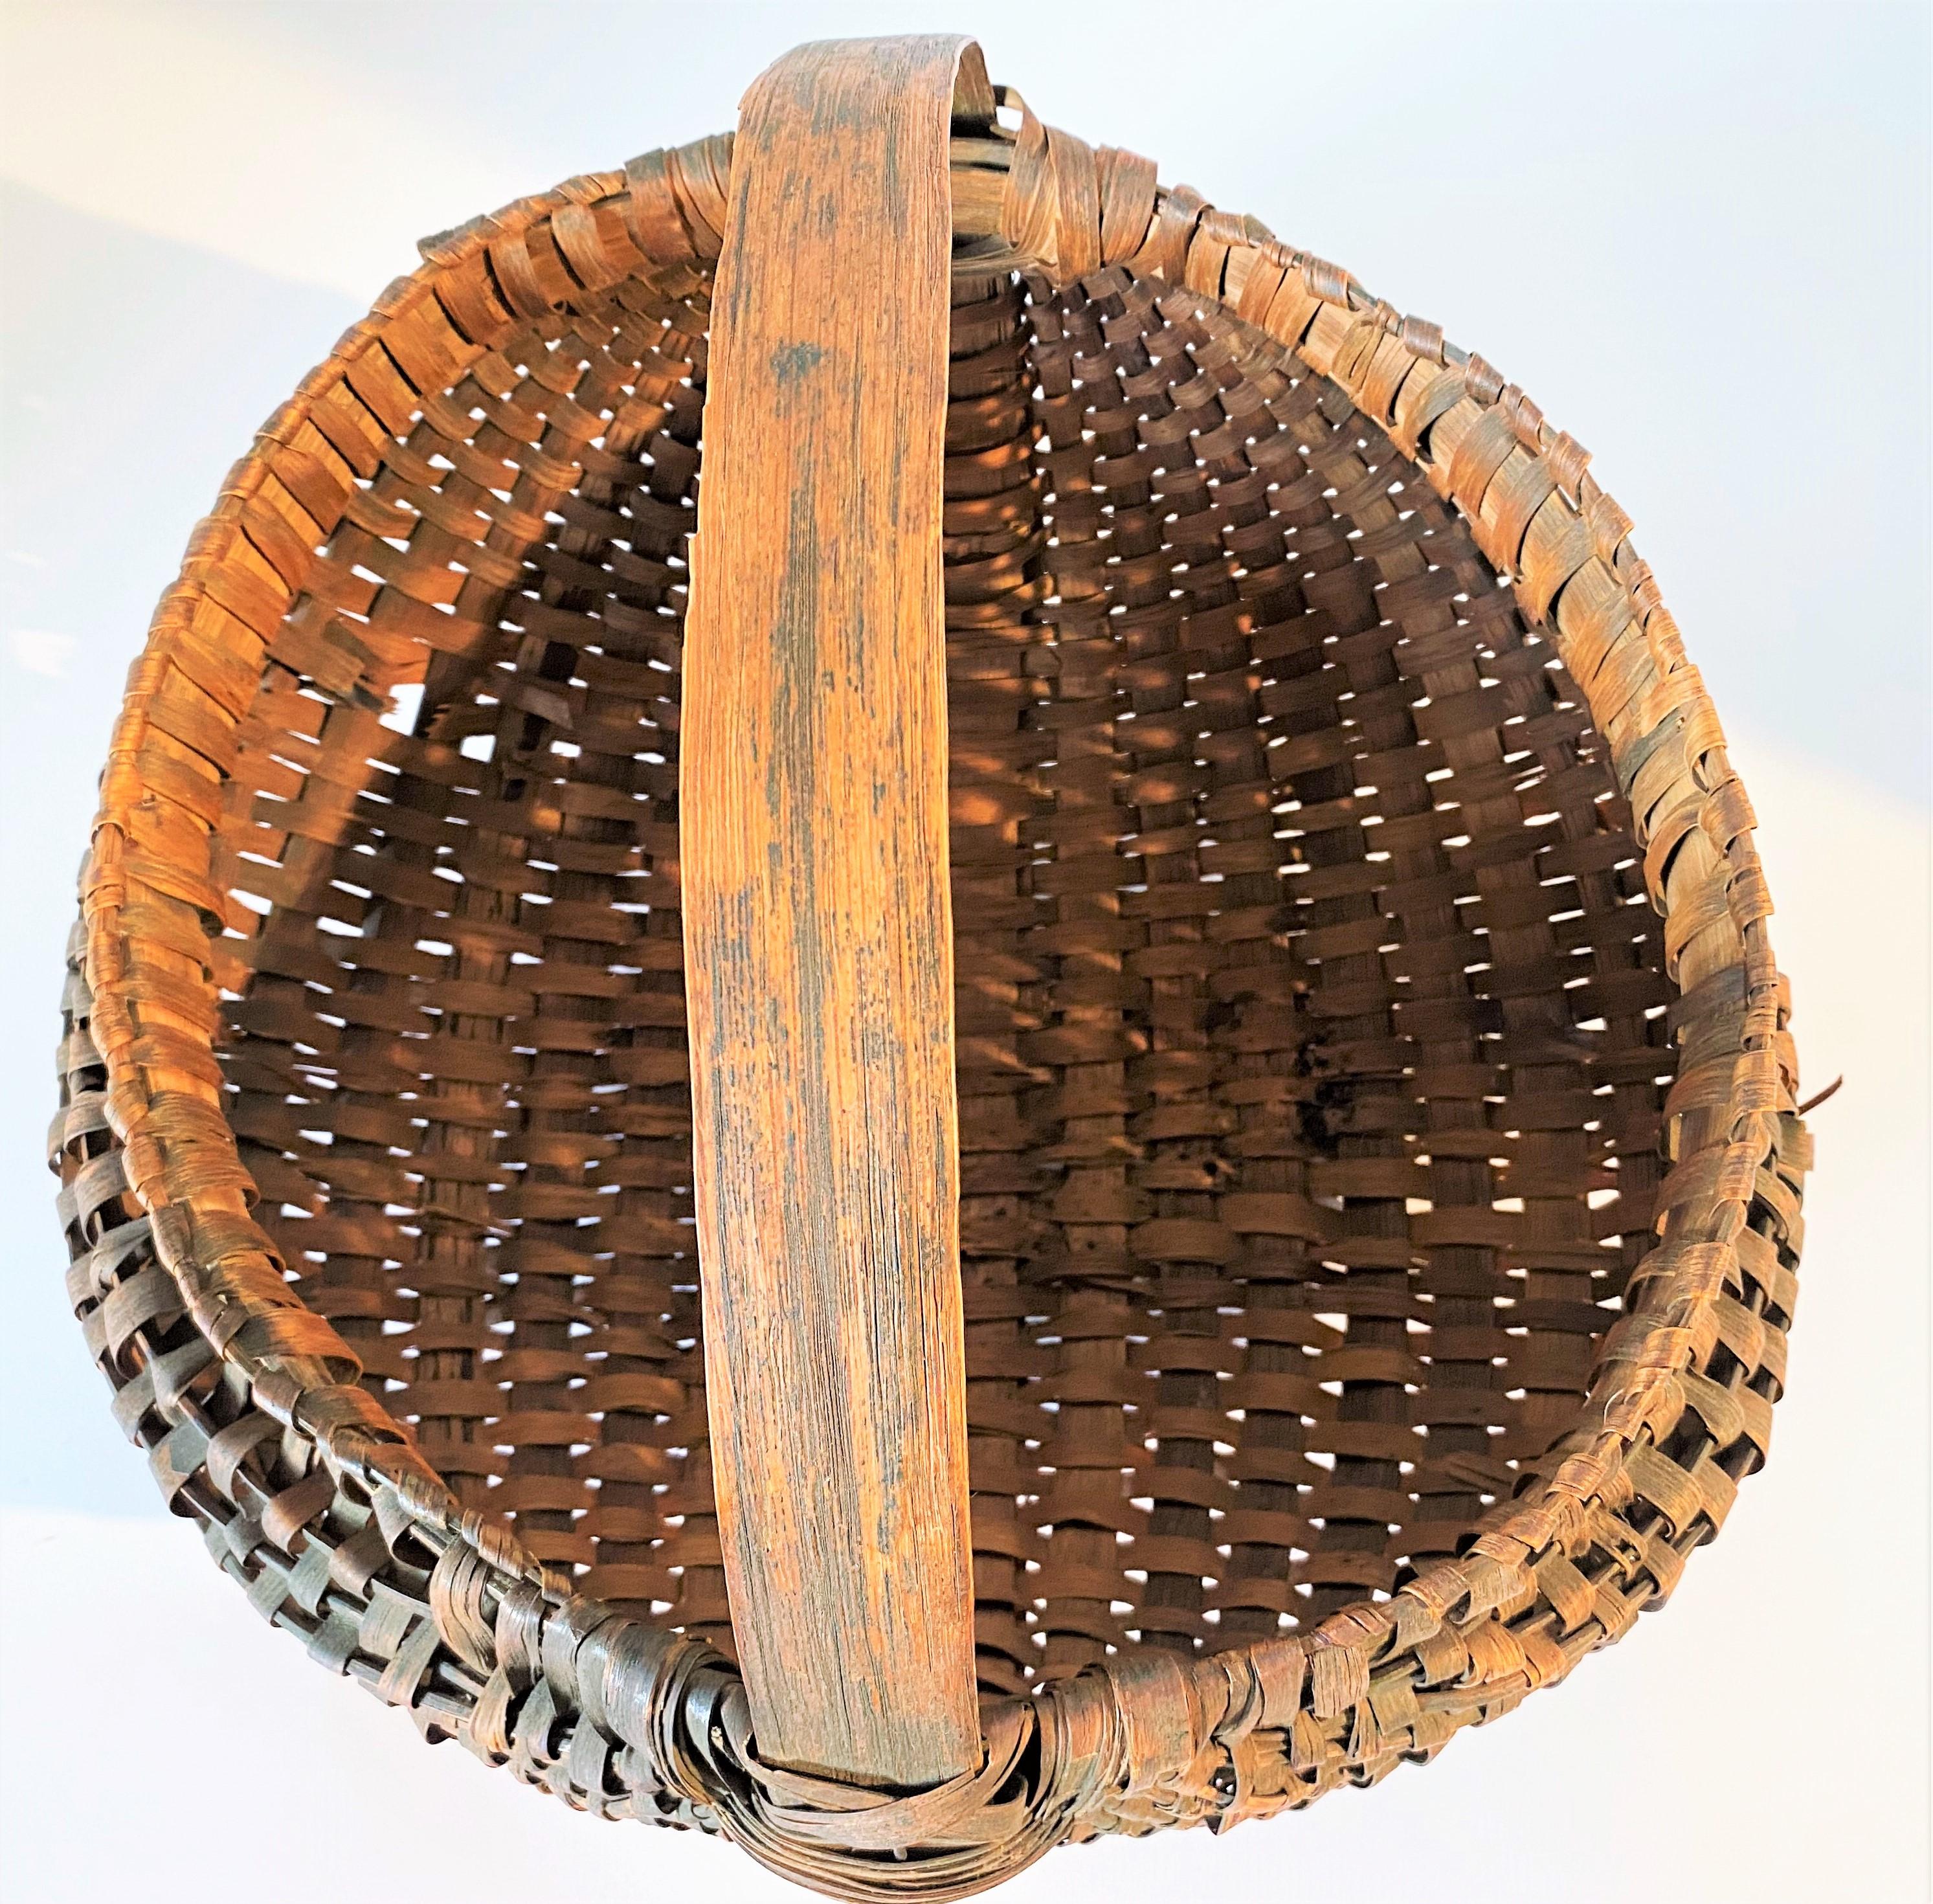 Large 19th C hand woven buttocks handled basket from New England.